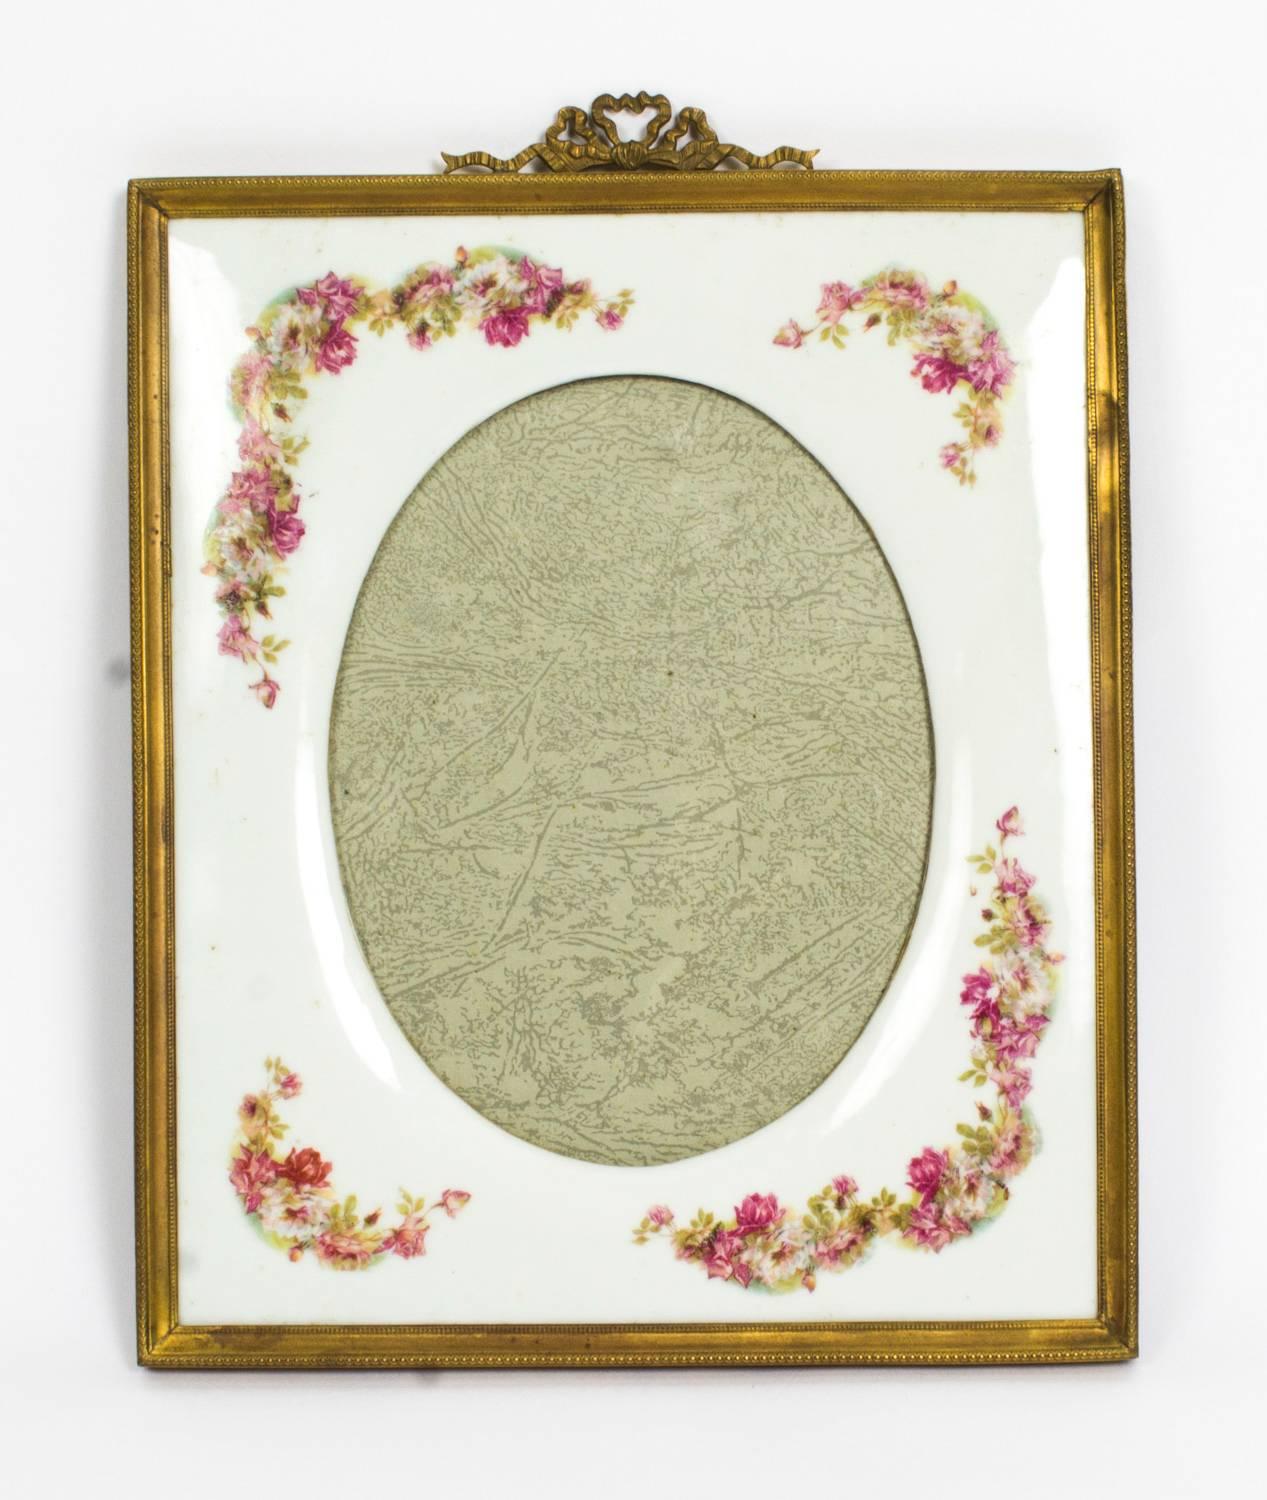 A decorative antique pair of early 20th century Continental porcelain photograph frames, decorated with hand-painted garlands of flowers.

Condition:
In really excellent condition with no chips, cracks or signs of repair, please see photos for